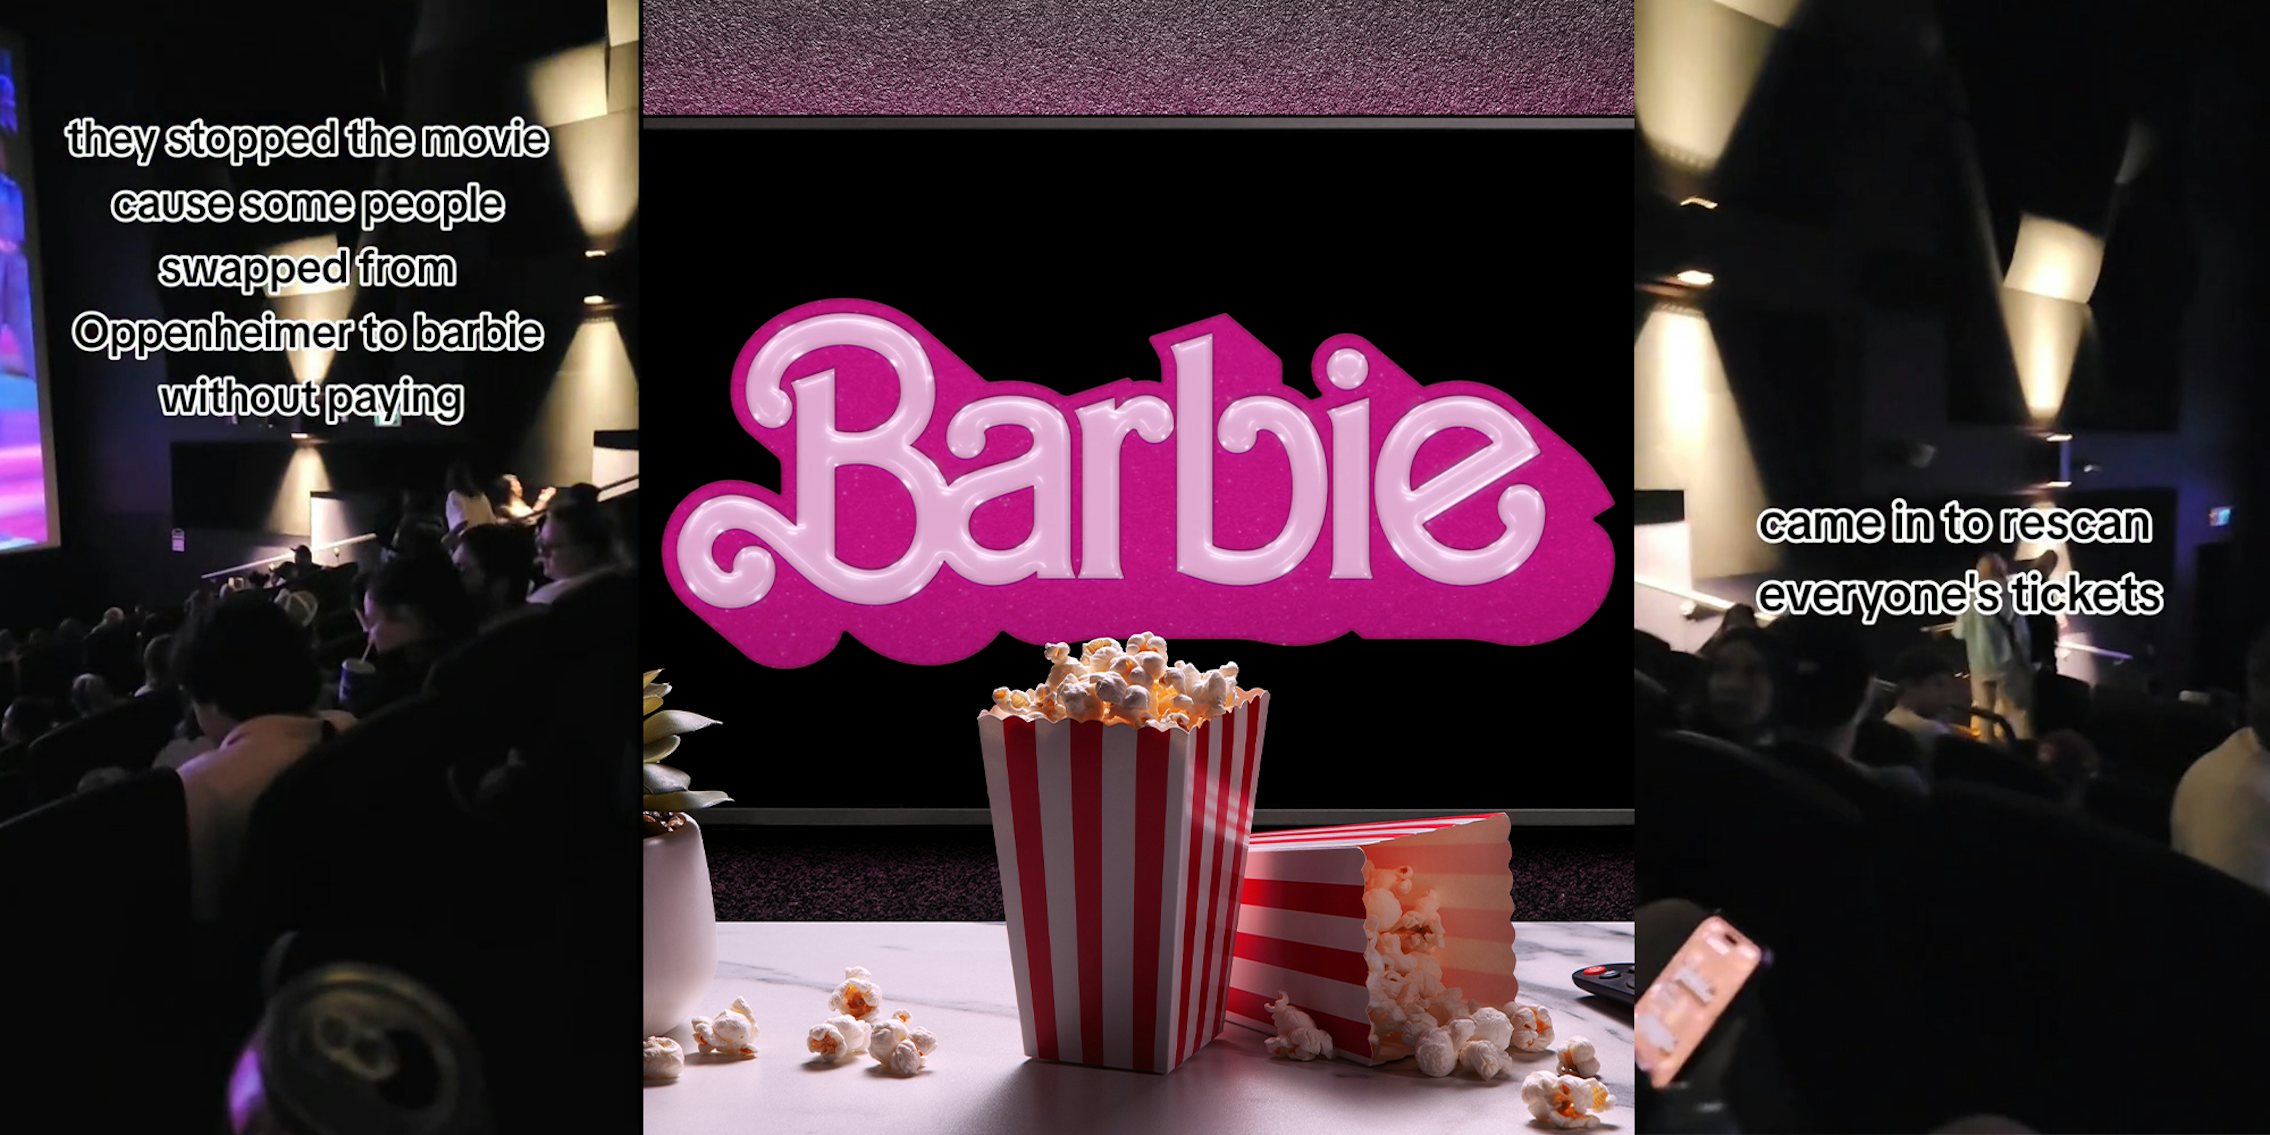 Our neighborhood cinema @theriverviewtheater is screening the Barb movie  tomorrow. Come correct!! We're open 12-6pm today. ✌️💗#barb #barbie